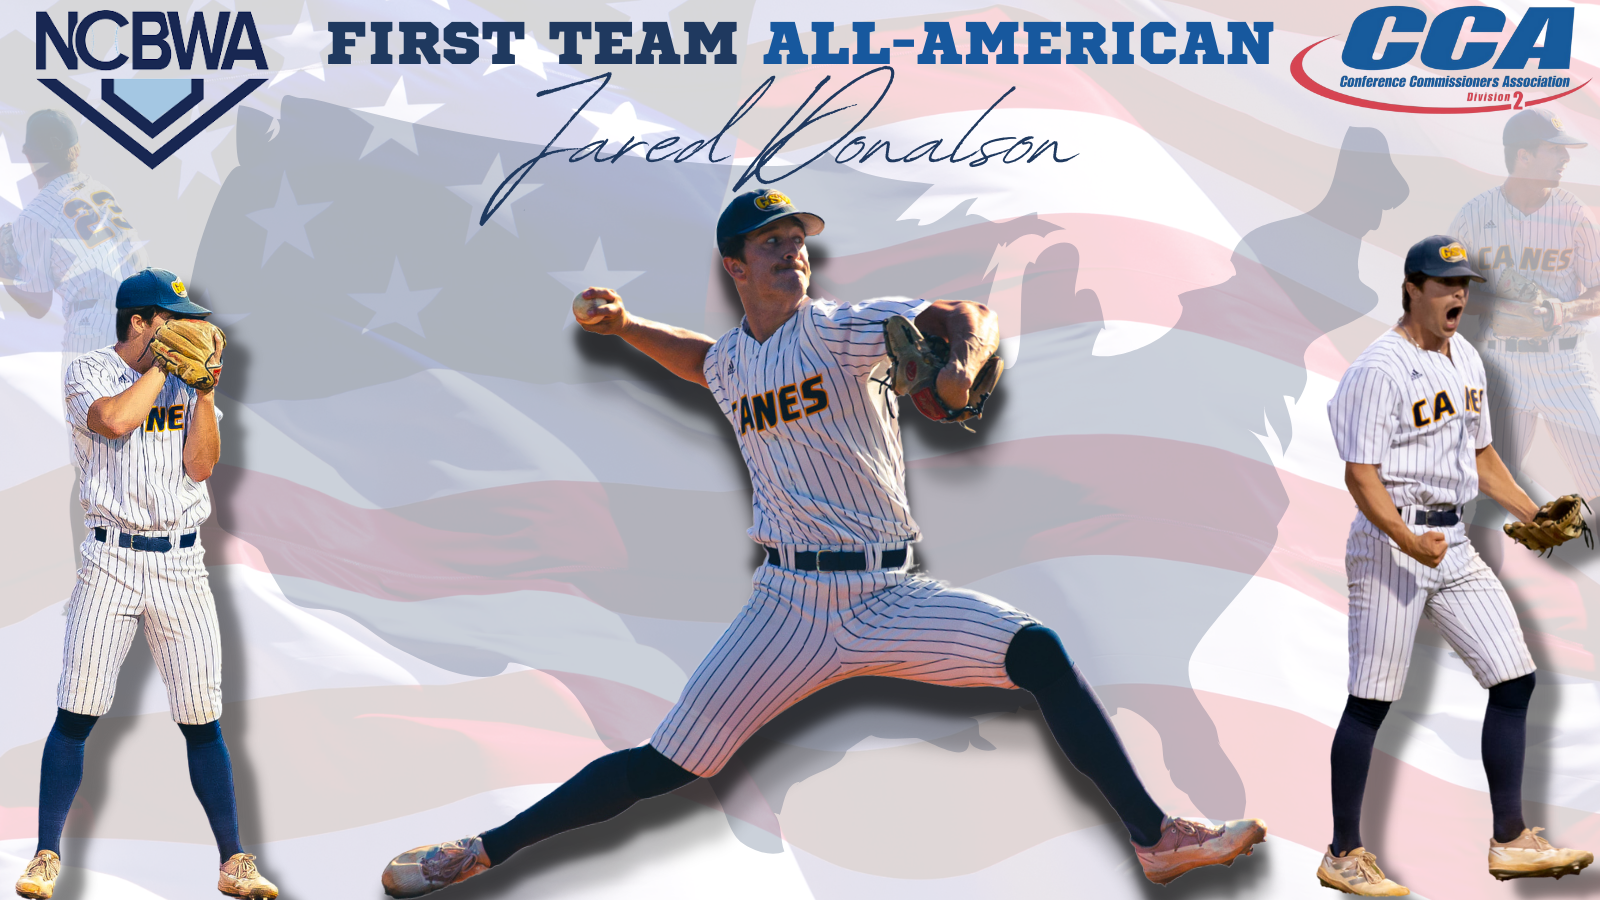 Jared Donalson Named First Team All-American